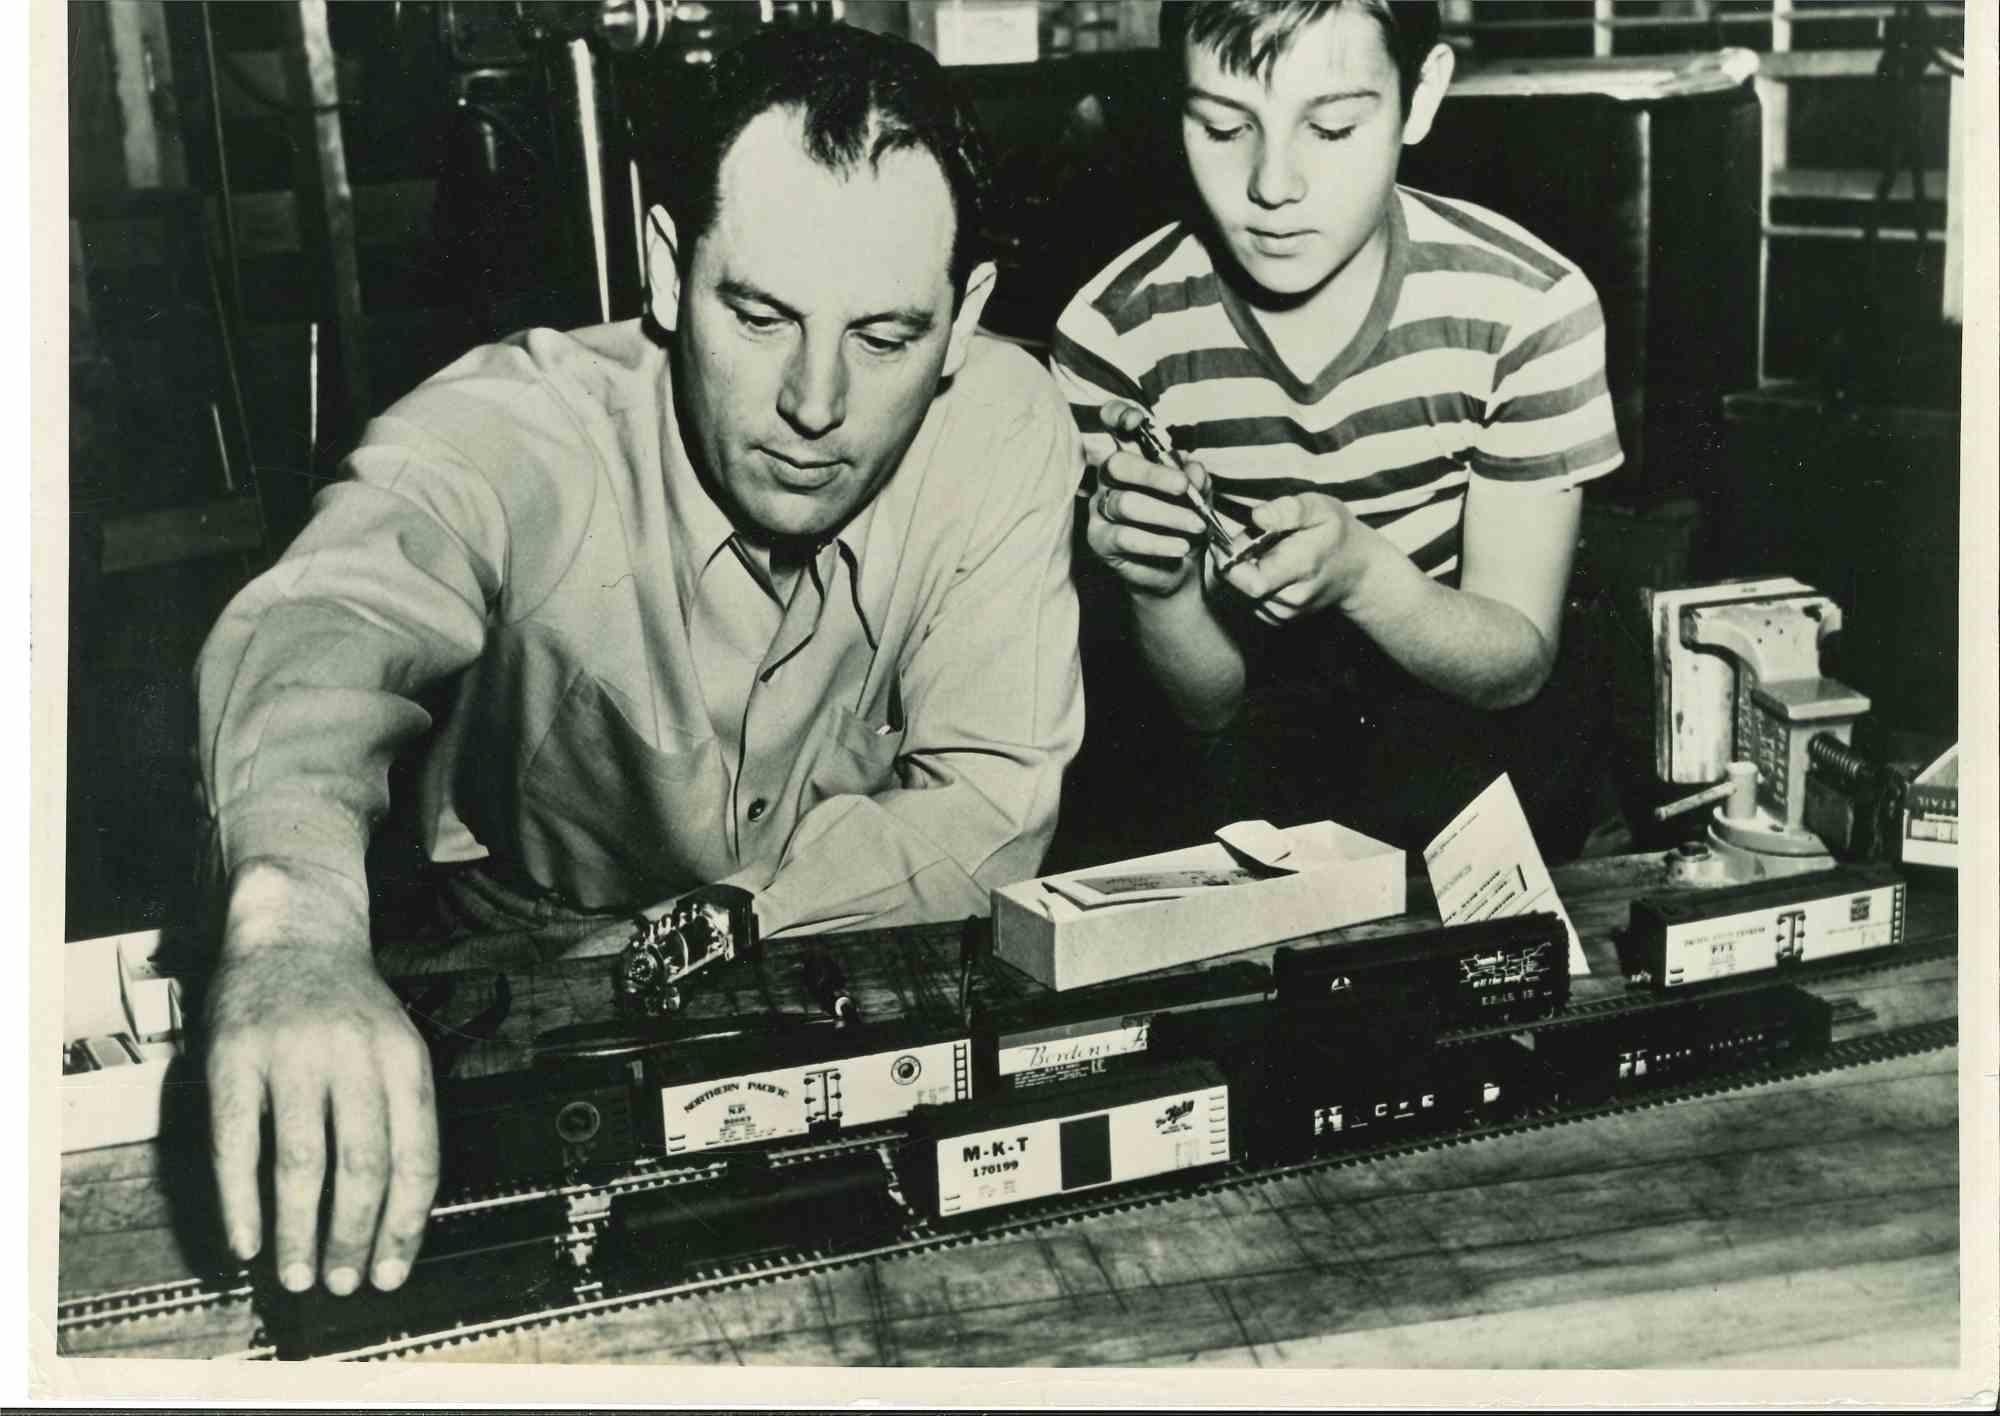 Unknown Figurative Photograph - Miniature Railroad Models: An American Hobby - Vintage Photograph - 1950s